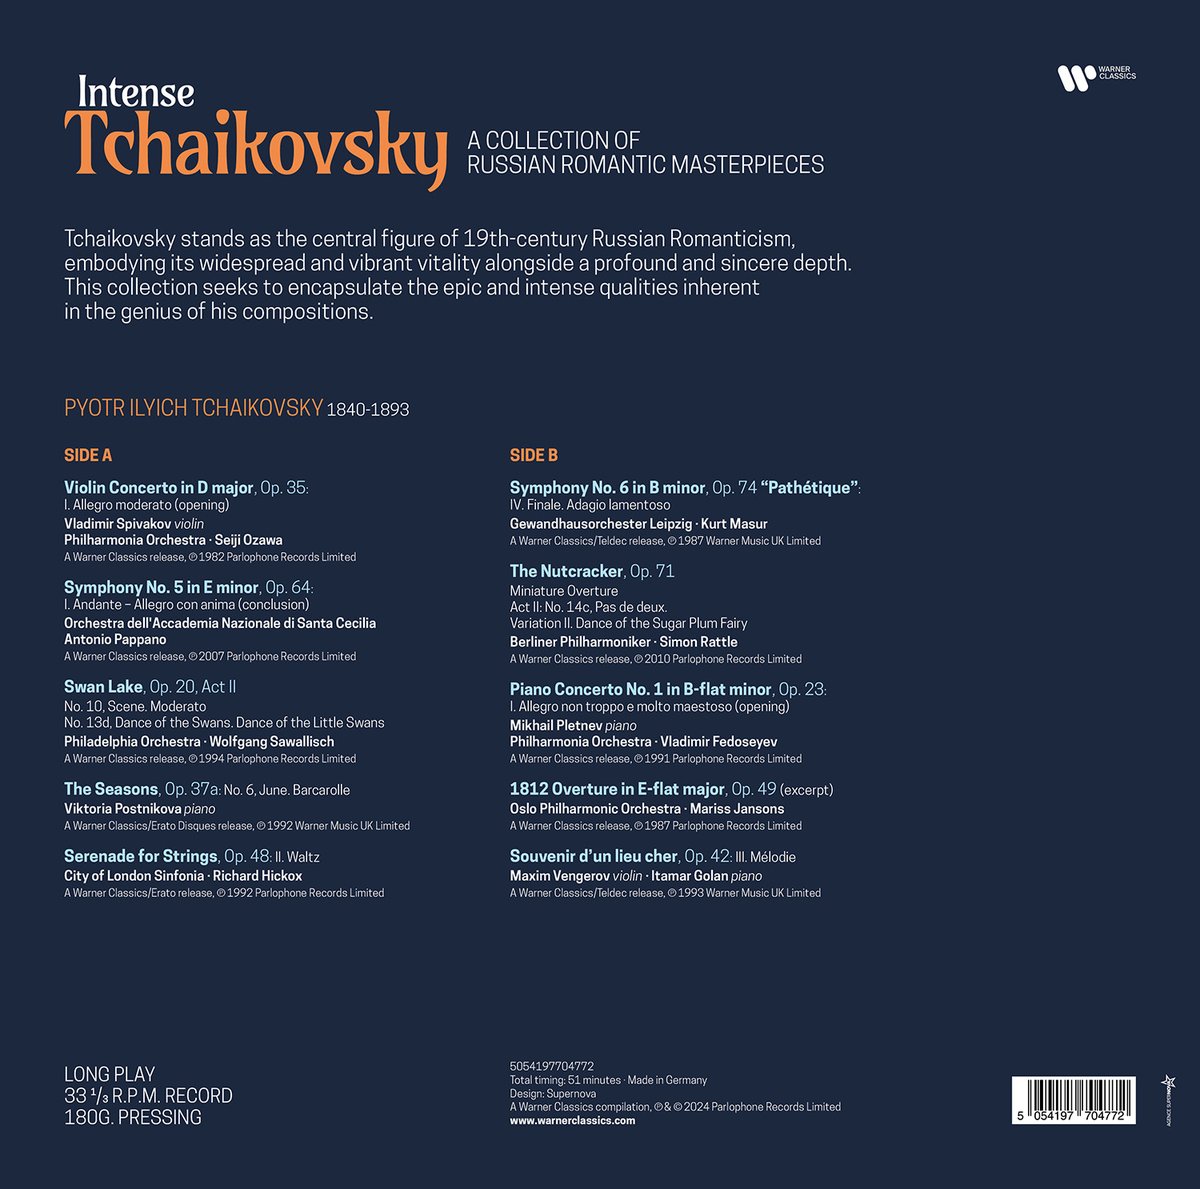 More Tchaikovsky celebrations today with a new LP release of selected from the Philharmonia, Philadelphia, Gewandhausorchester, Berlin Philharmoniker, and Oslo Philharmonic Orchestra: a total of 51 minutes illustrating the musical embodiment of 19th-century Russian Romanticism.